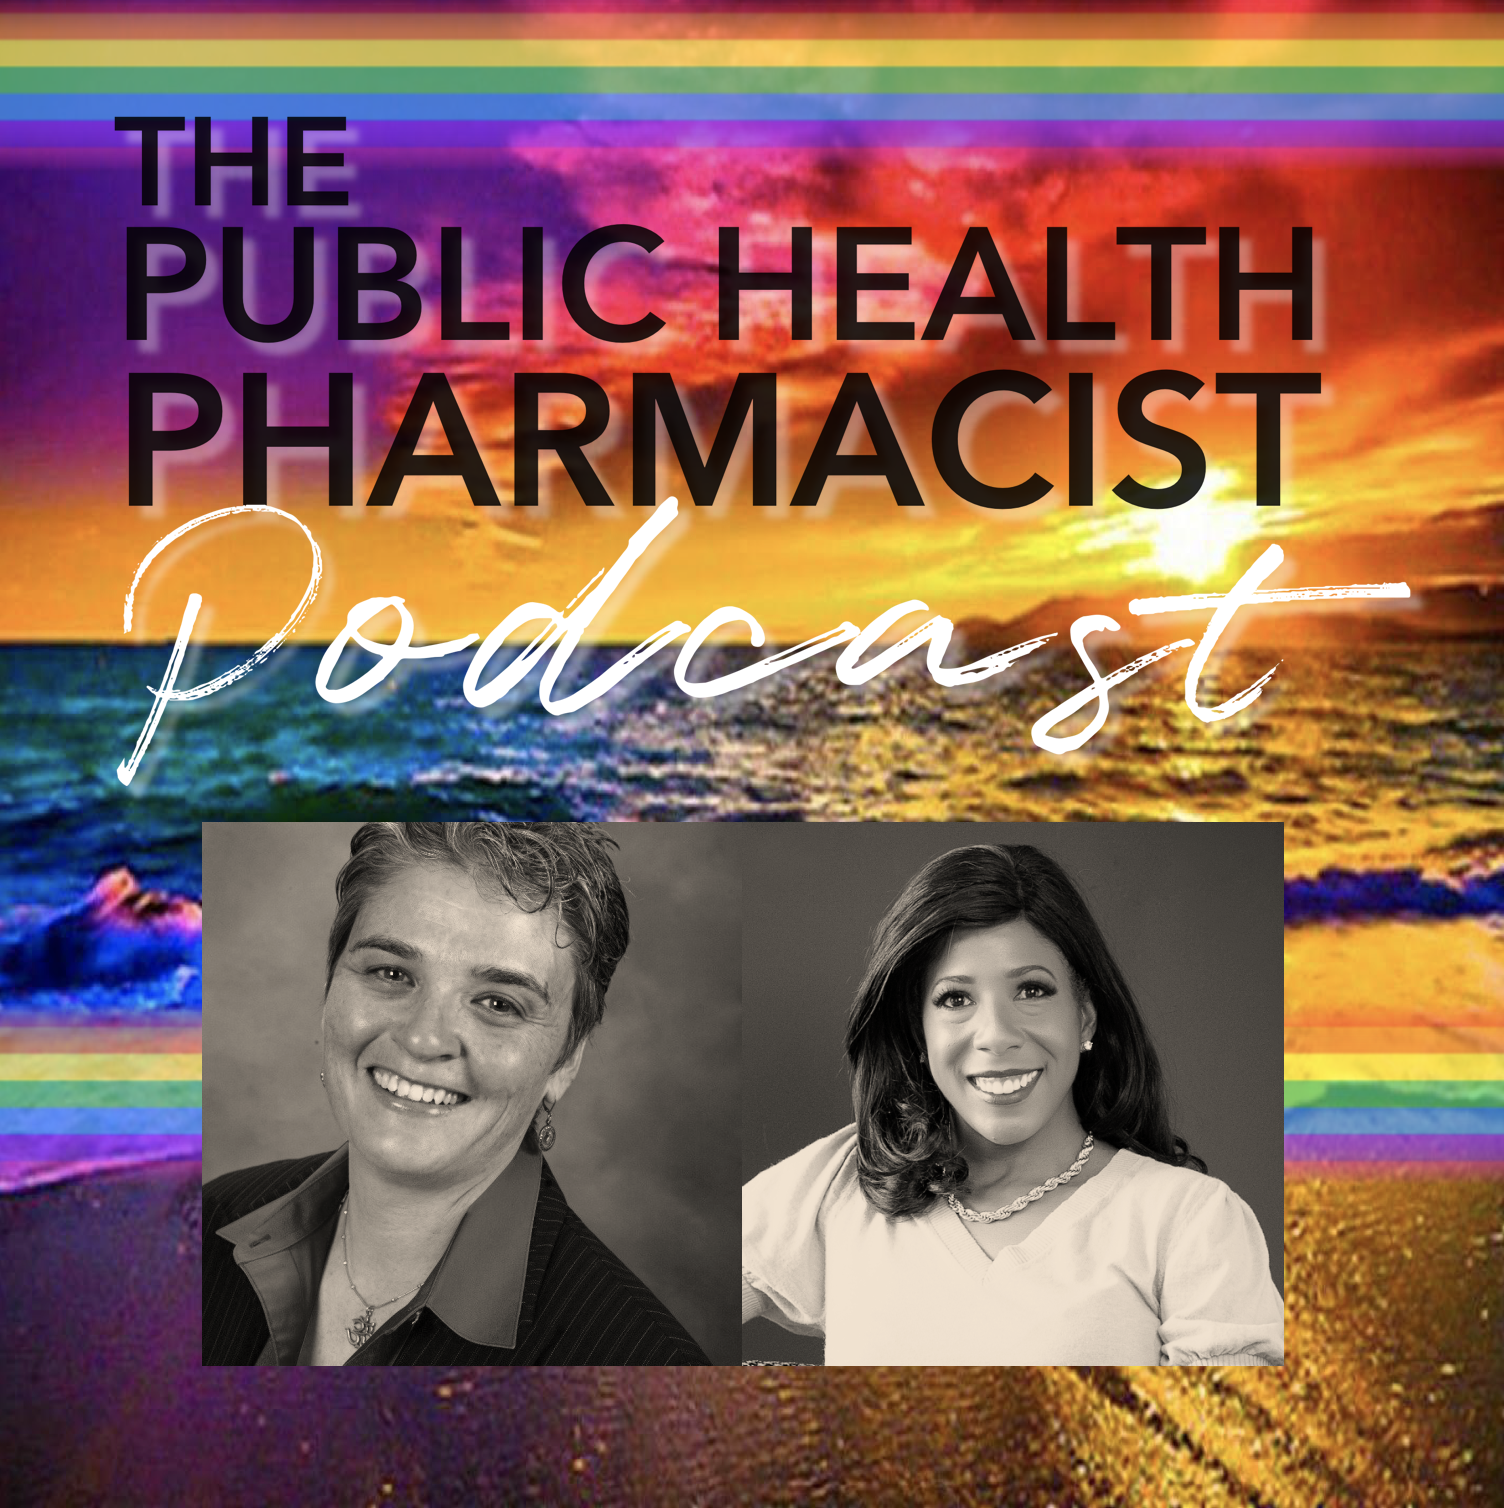 Caring for the Underserved and Advocating for Health Equity - A Thoughtful Conversation with The Conscious Pharmacist | The Public Health Pharmacist